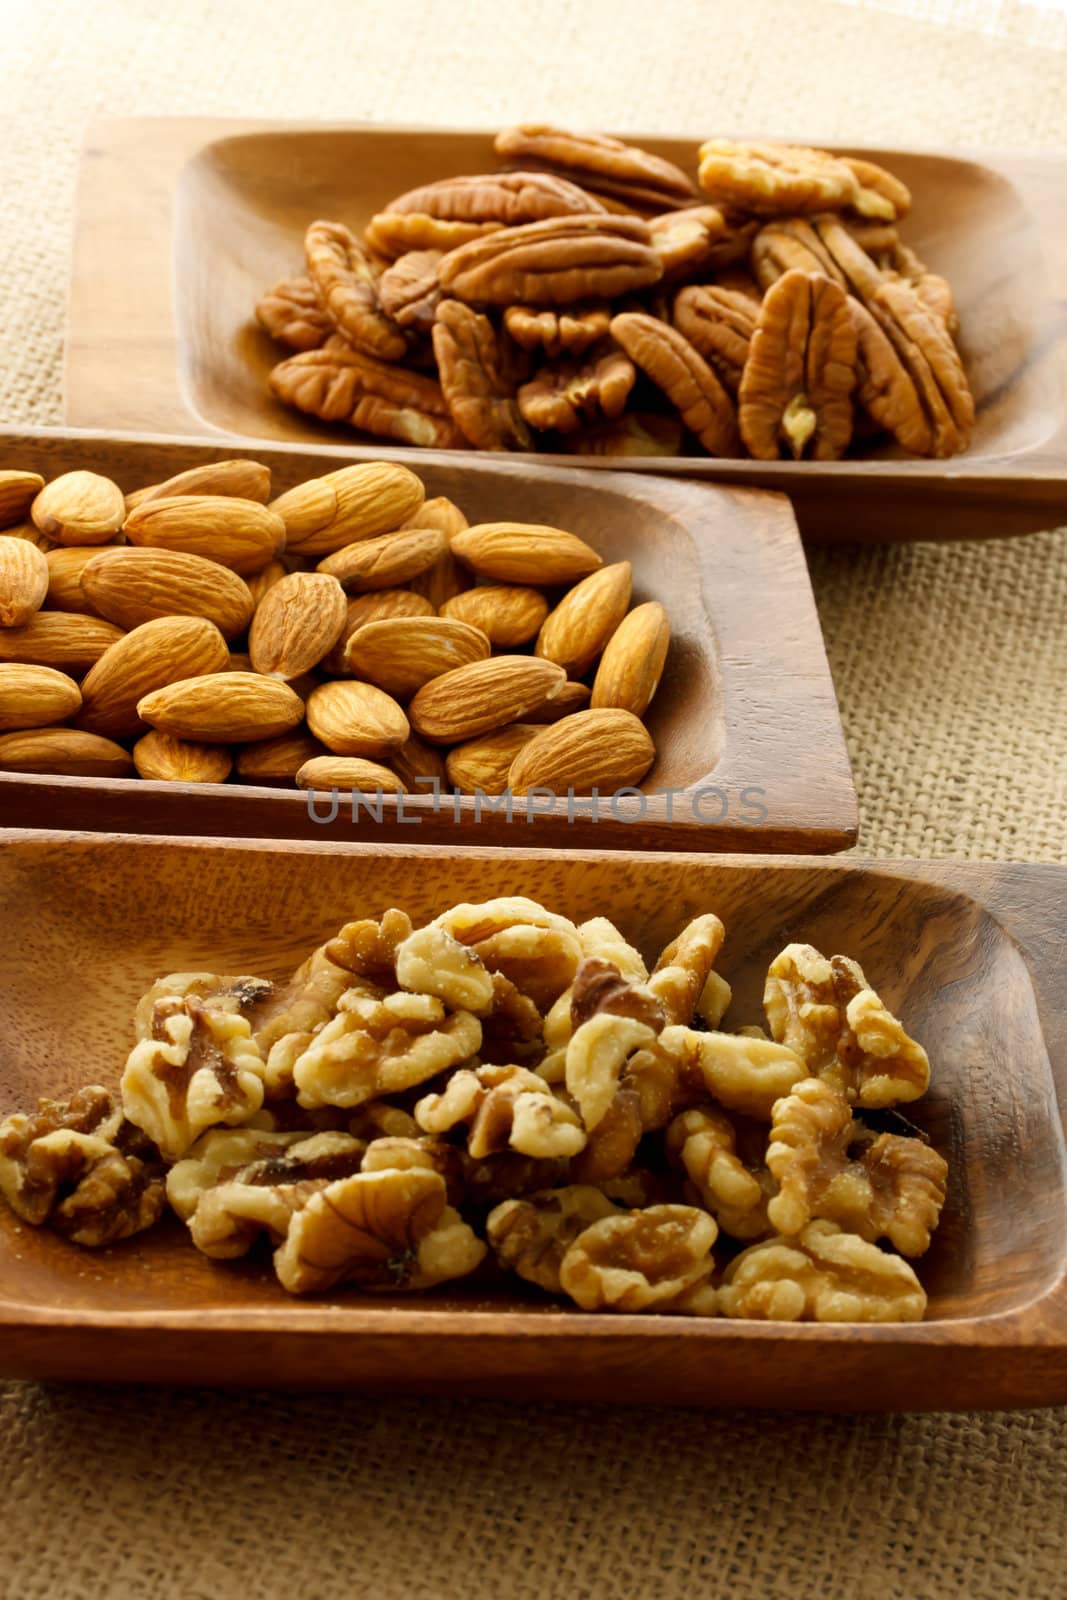 Assortment of nuts in wooden plates